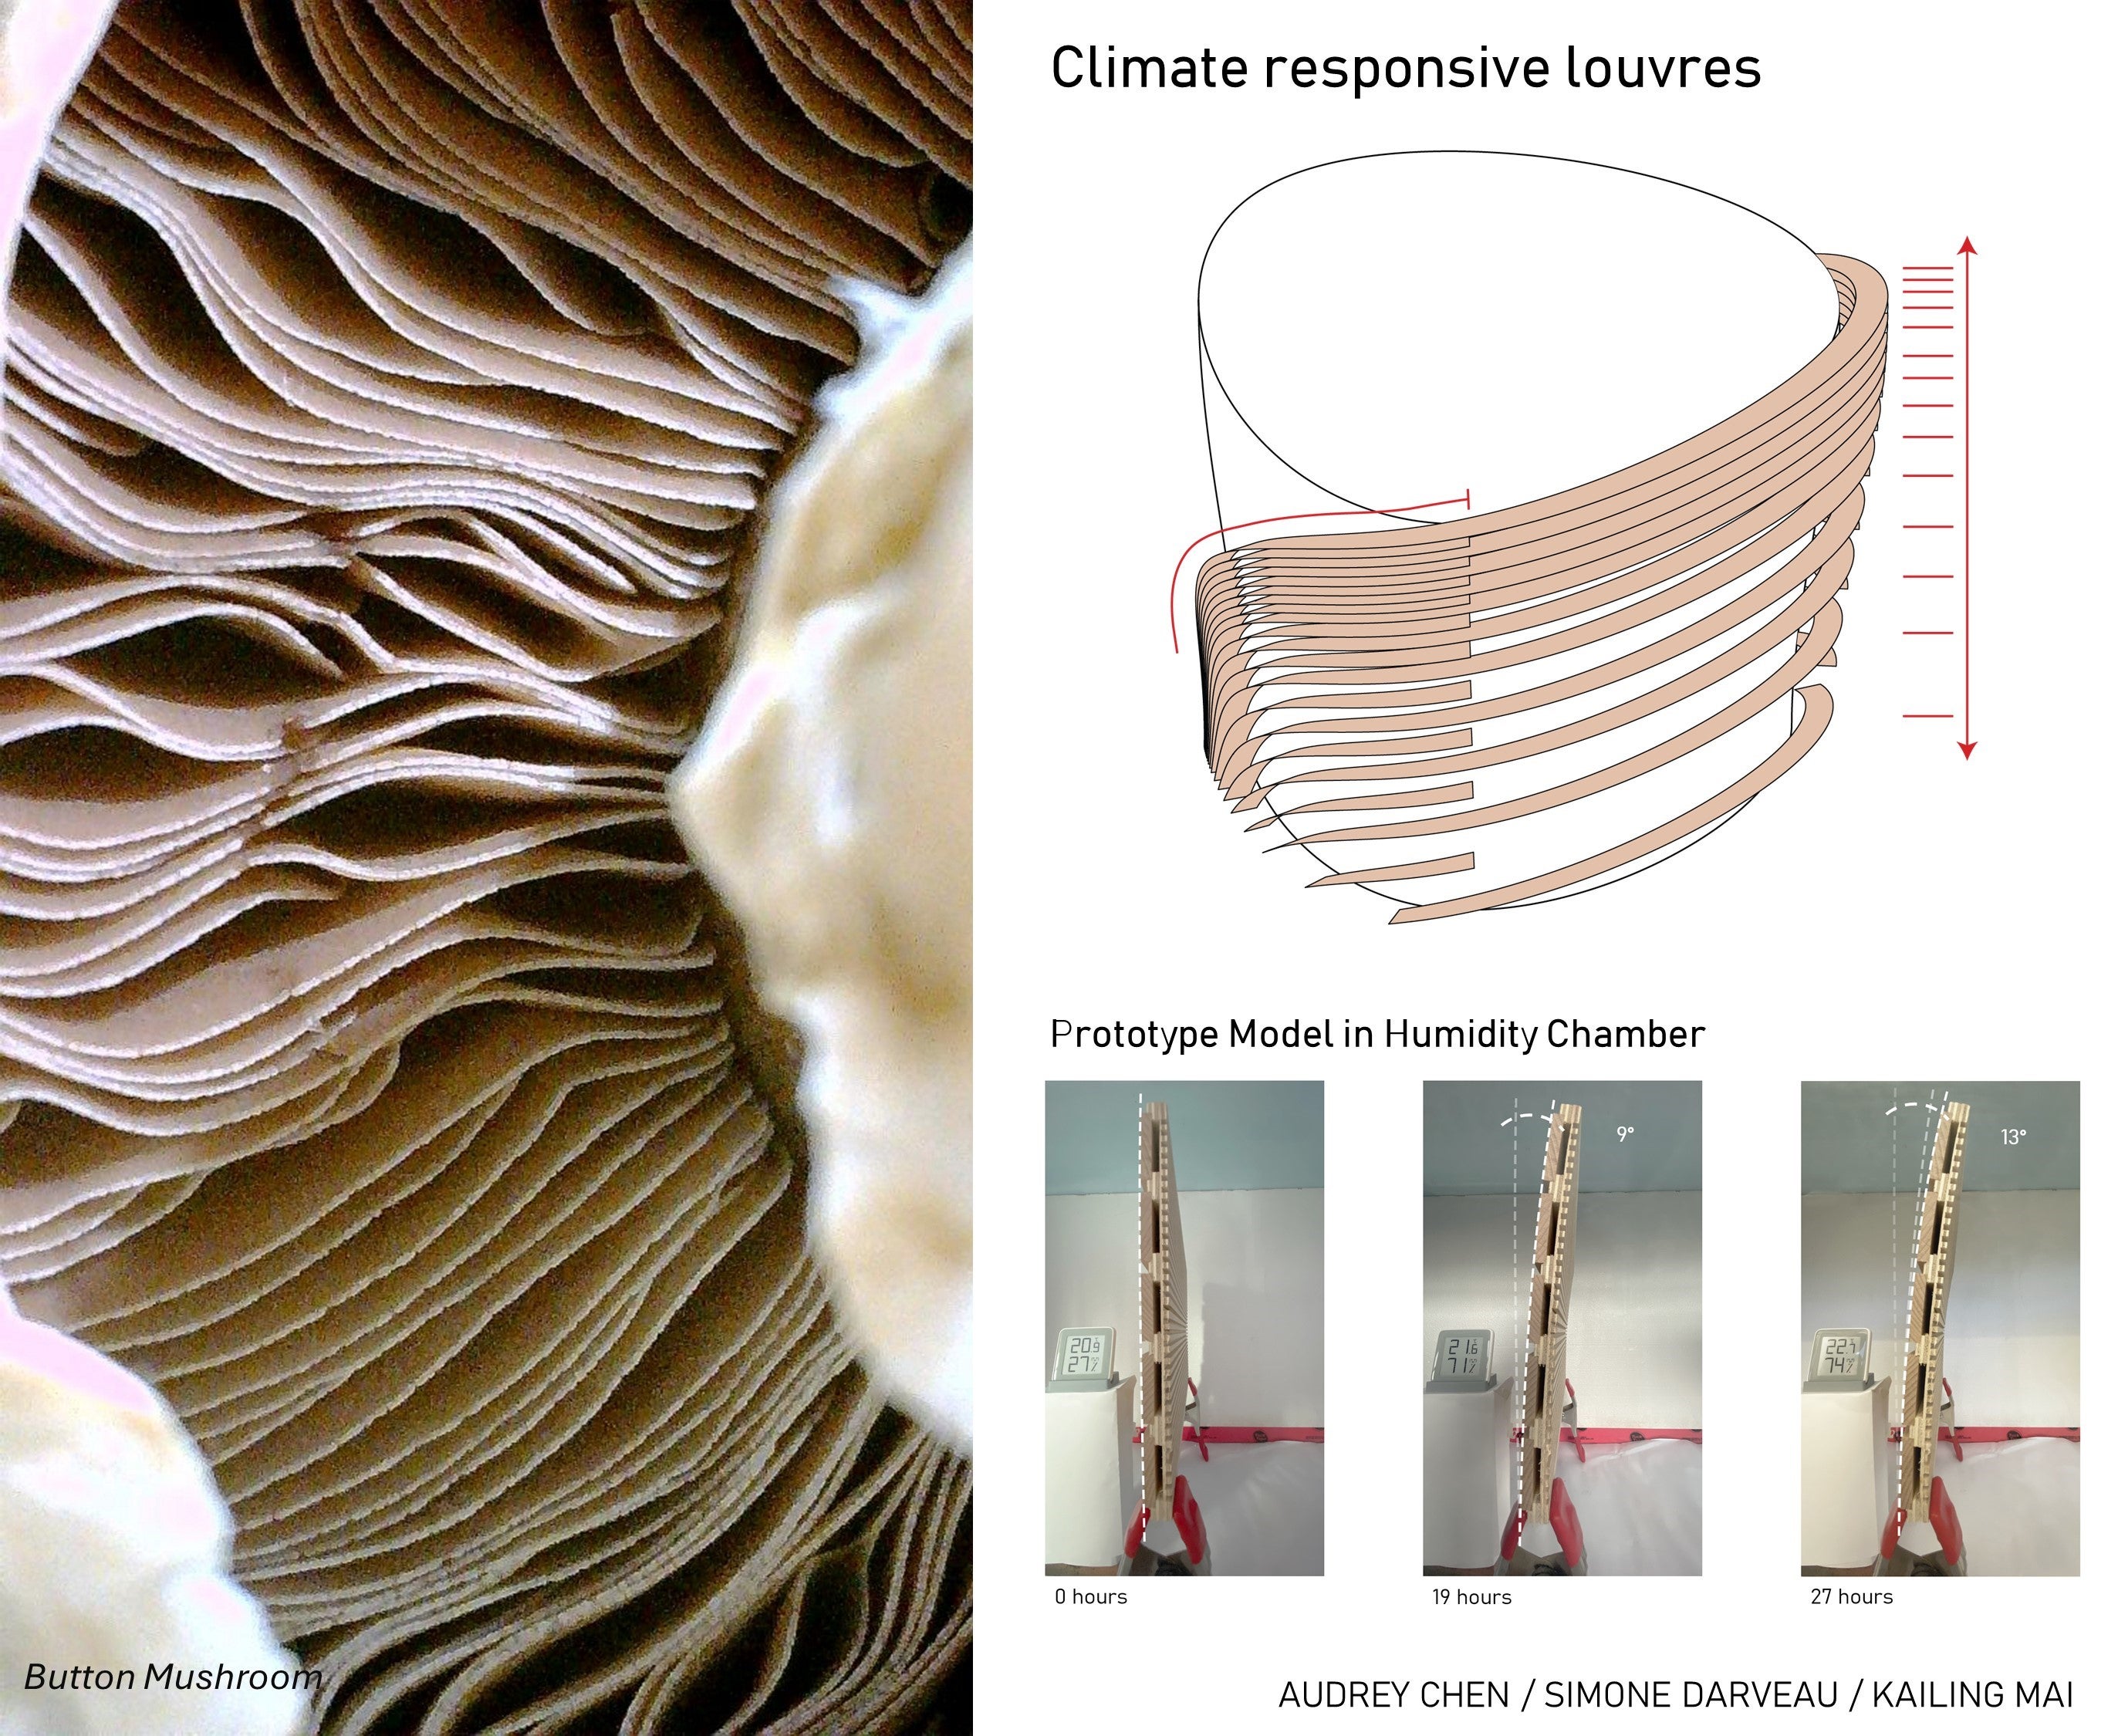 Architectural research project of a Climate responsive design based on a button mushroom